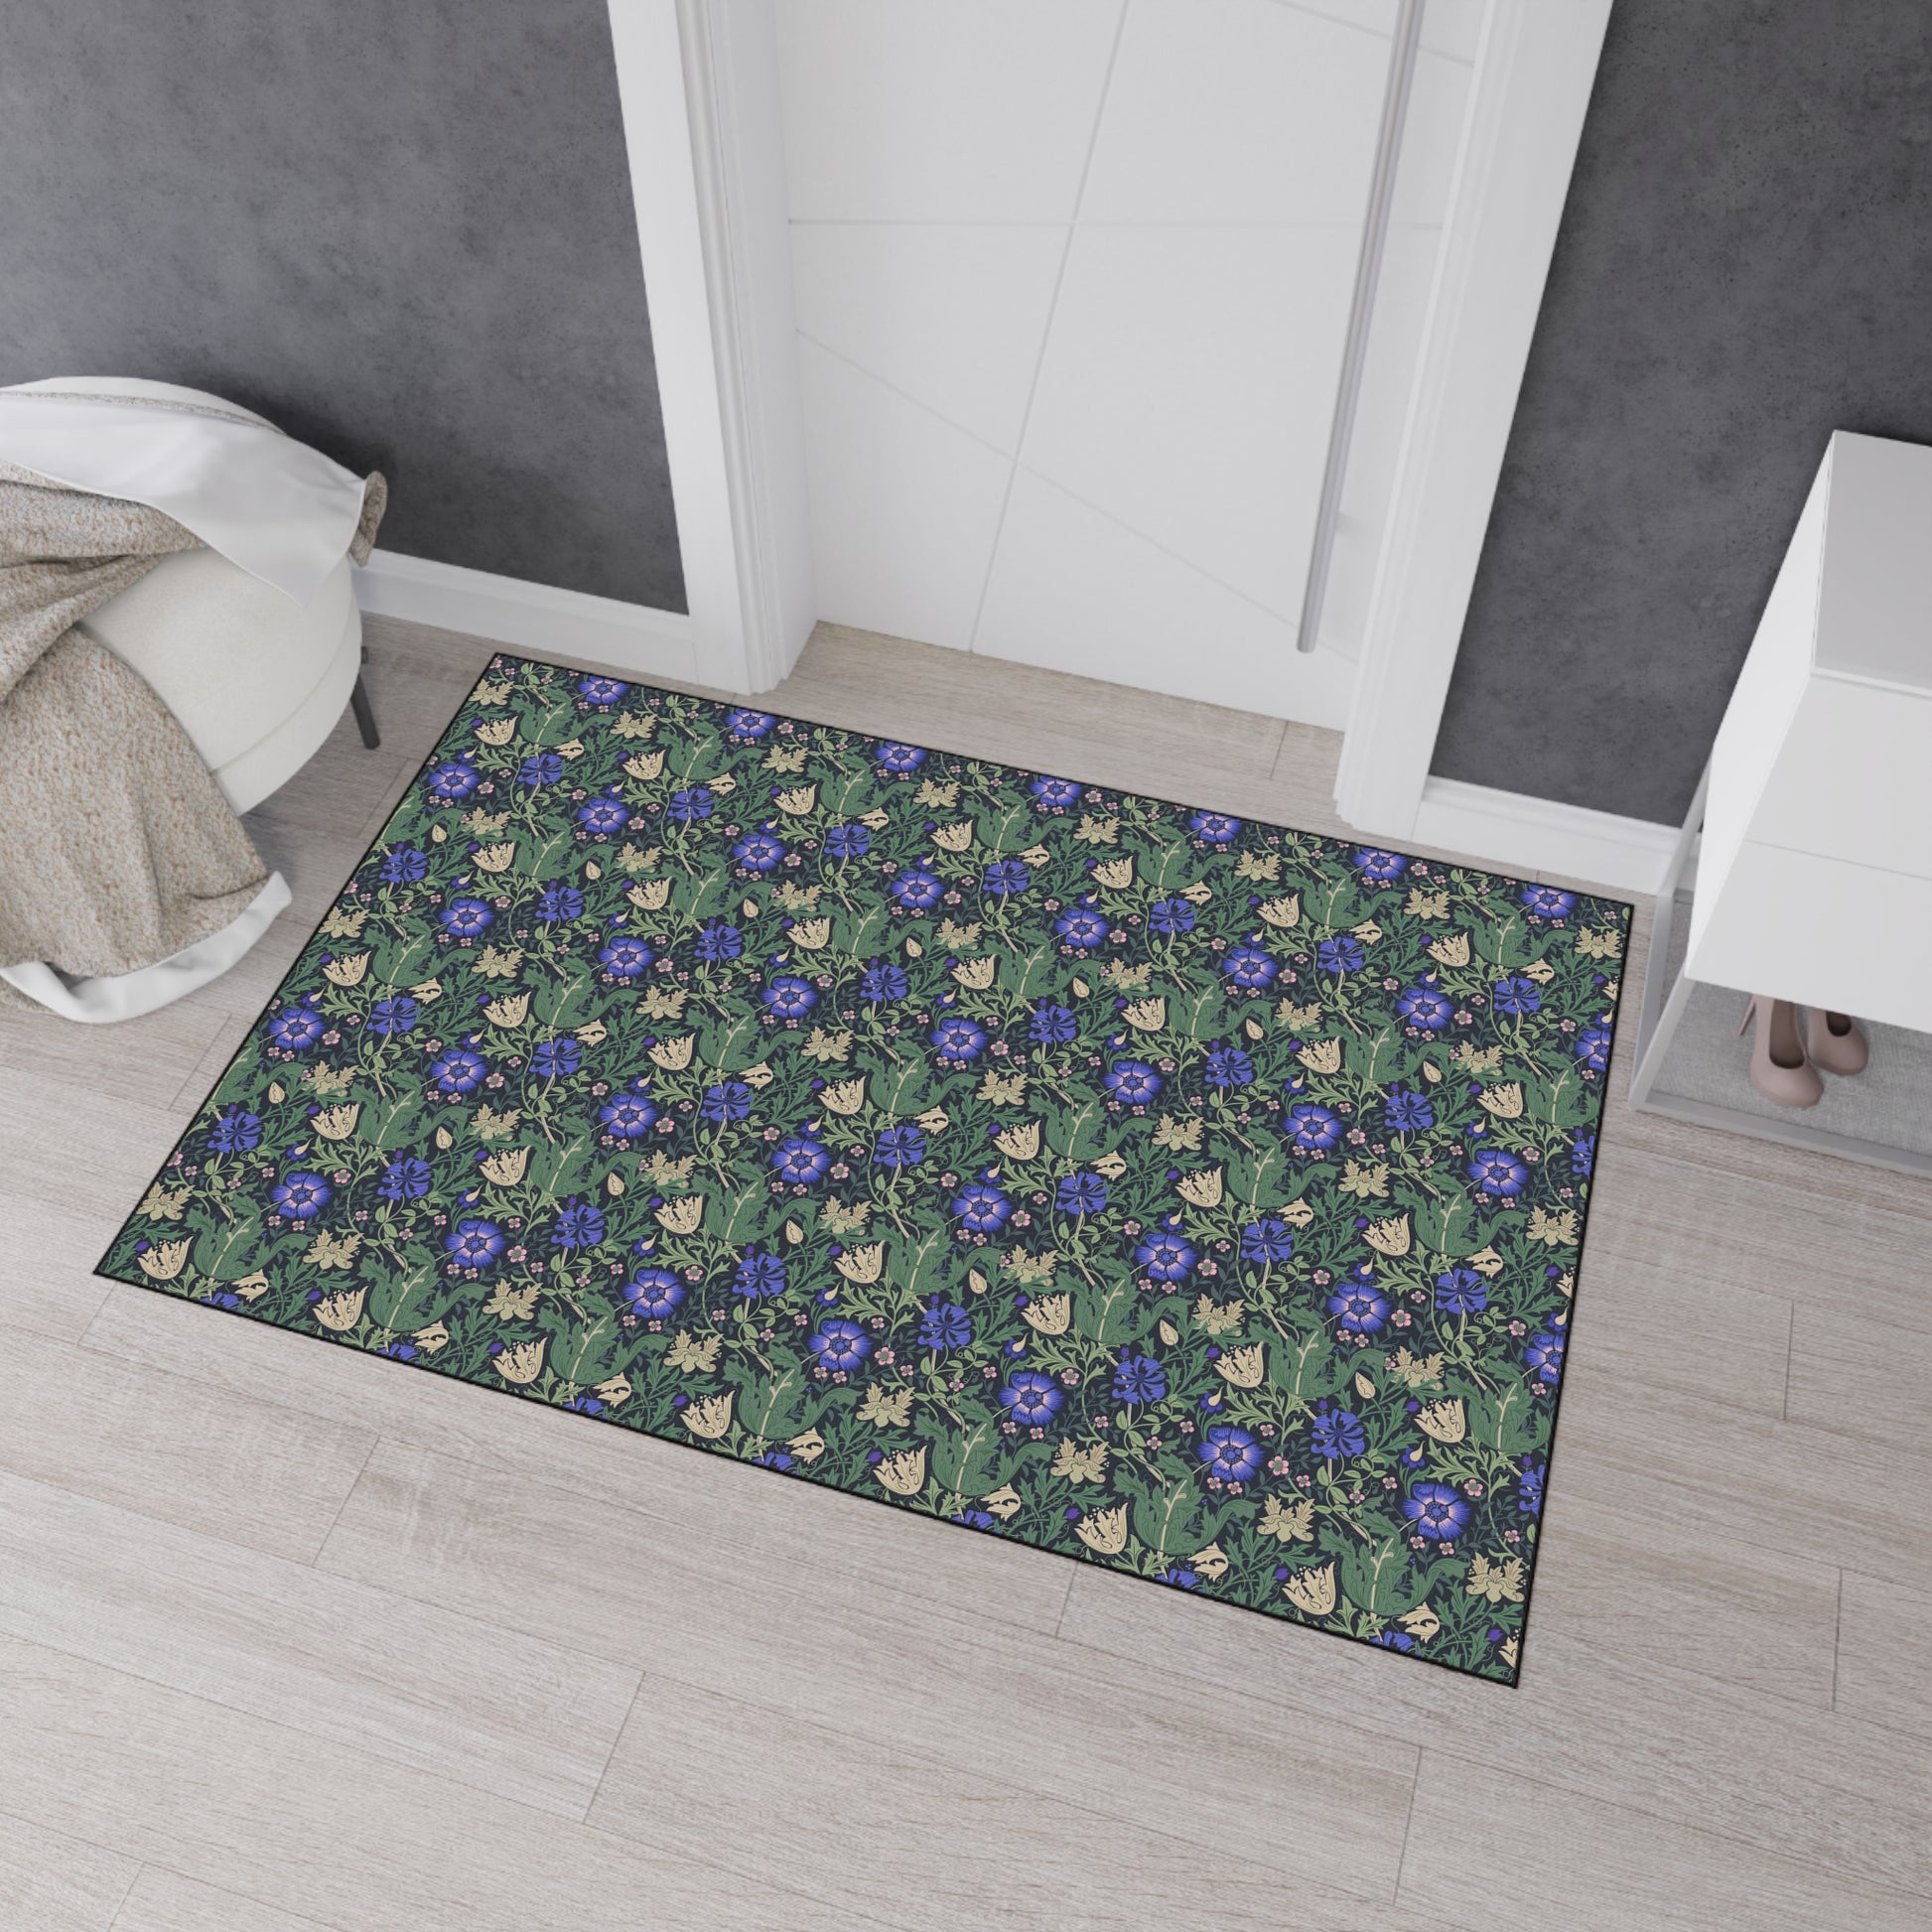 william-morris-co-heavy-duty-floor-mat-compton-collection-bluebell-cottage-9